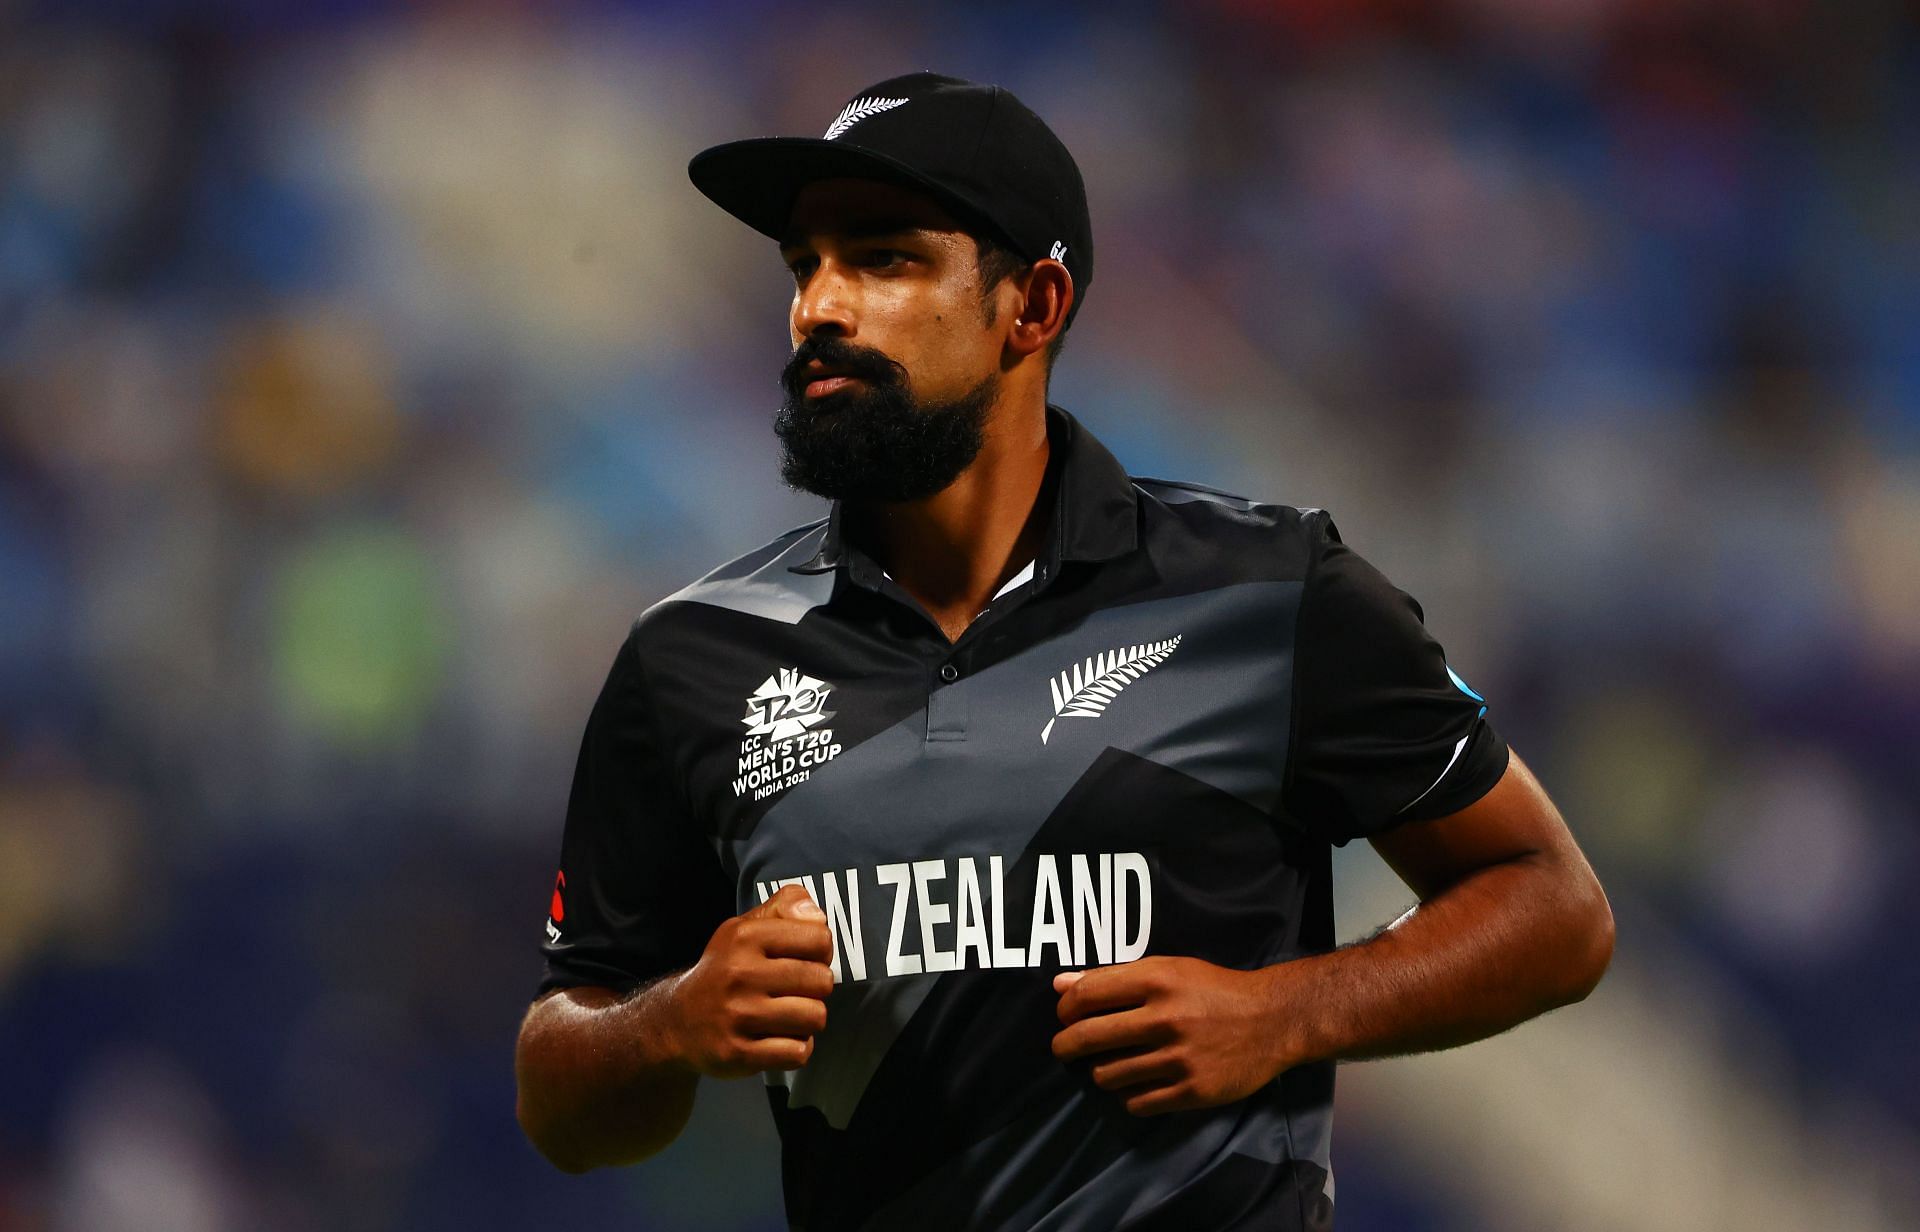 Ish Sodhi was born in Punjab but plays international cricket for New Zealand